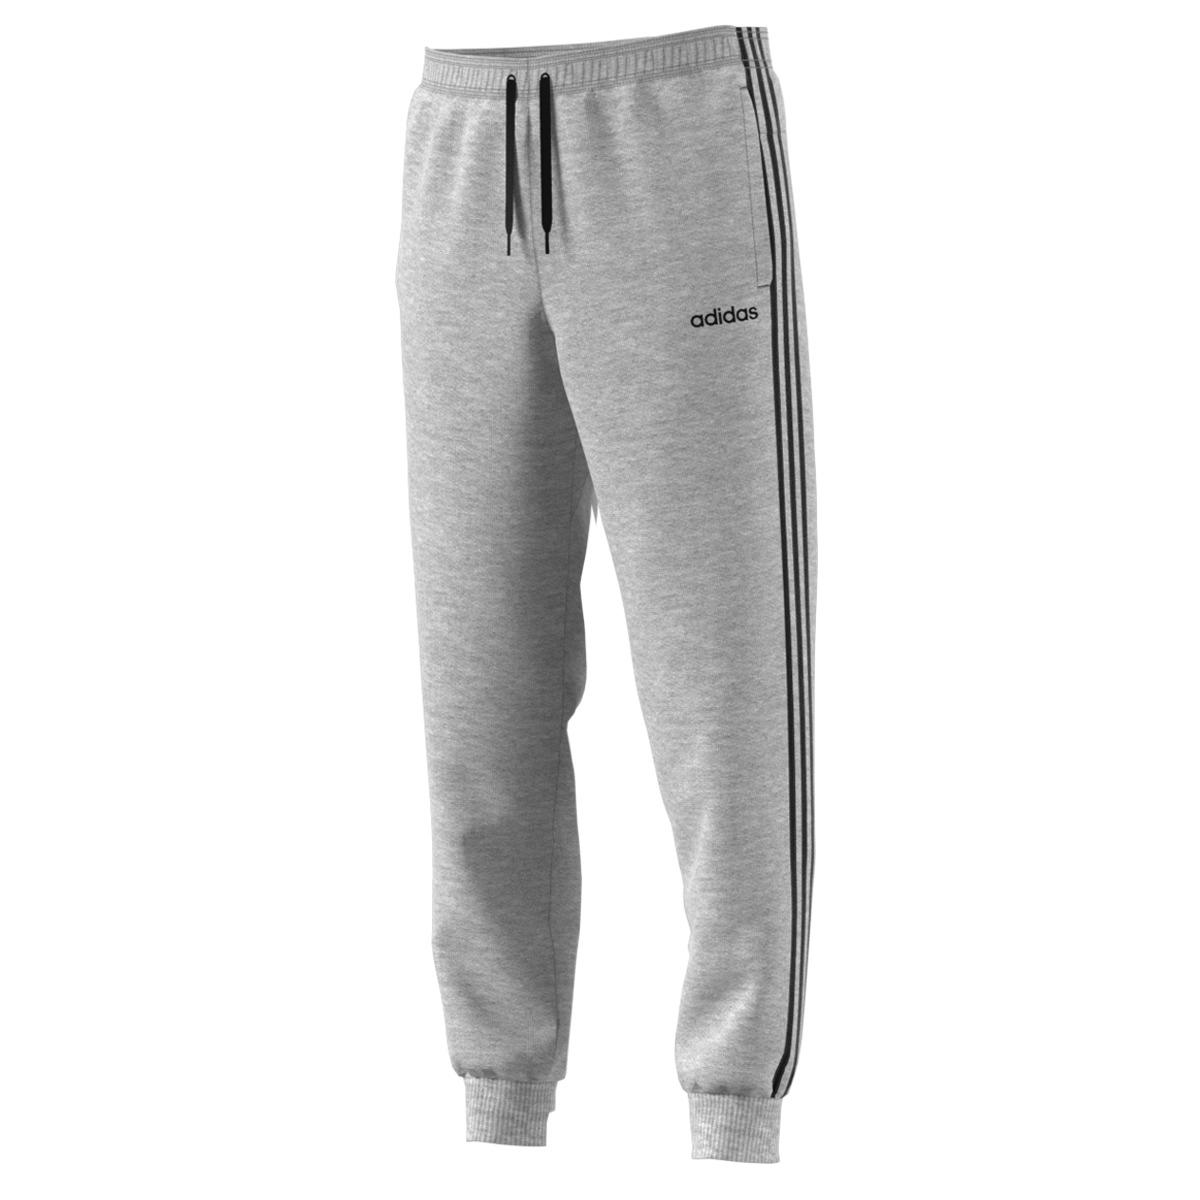 adidas Cotton Essentials 3 Stripes Trousers in Grey (Gray) for Men - Lyst